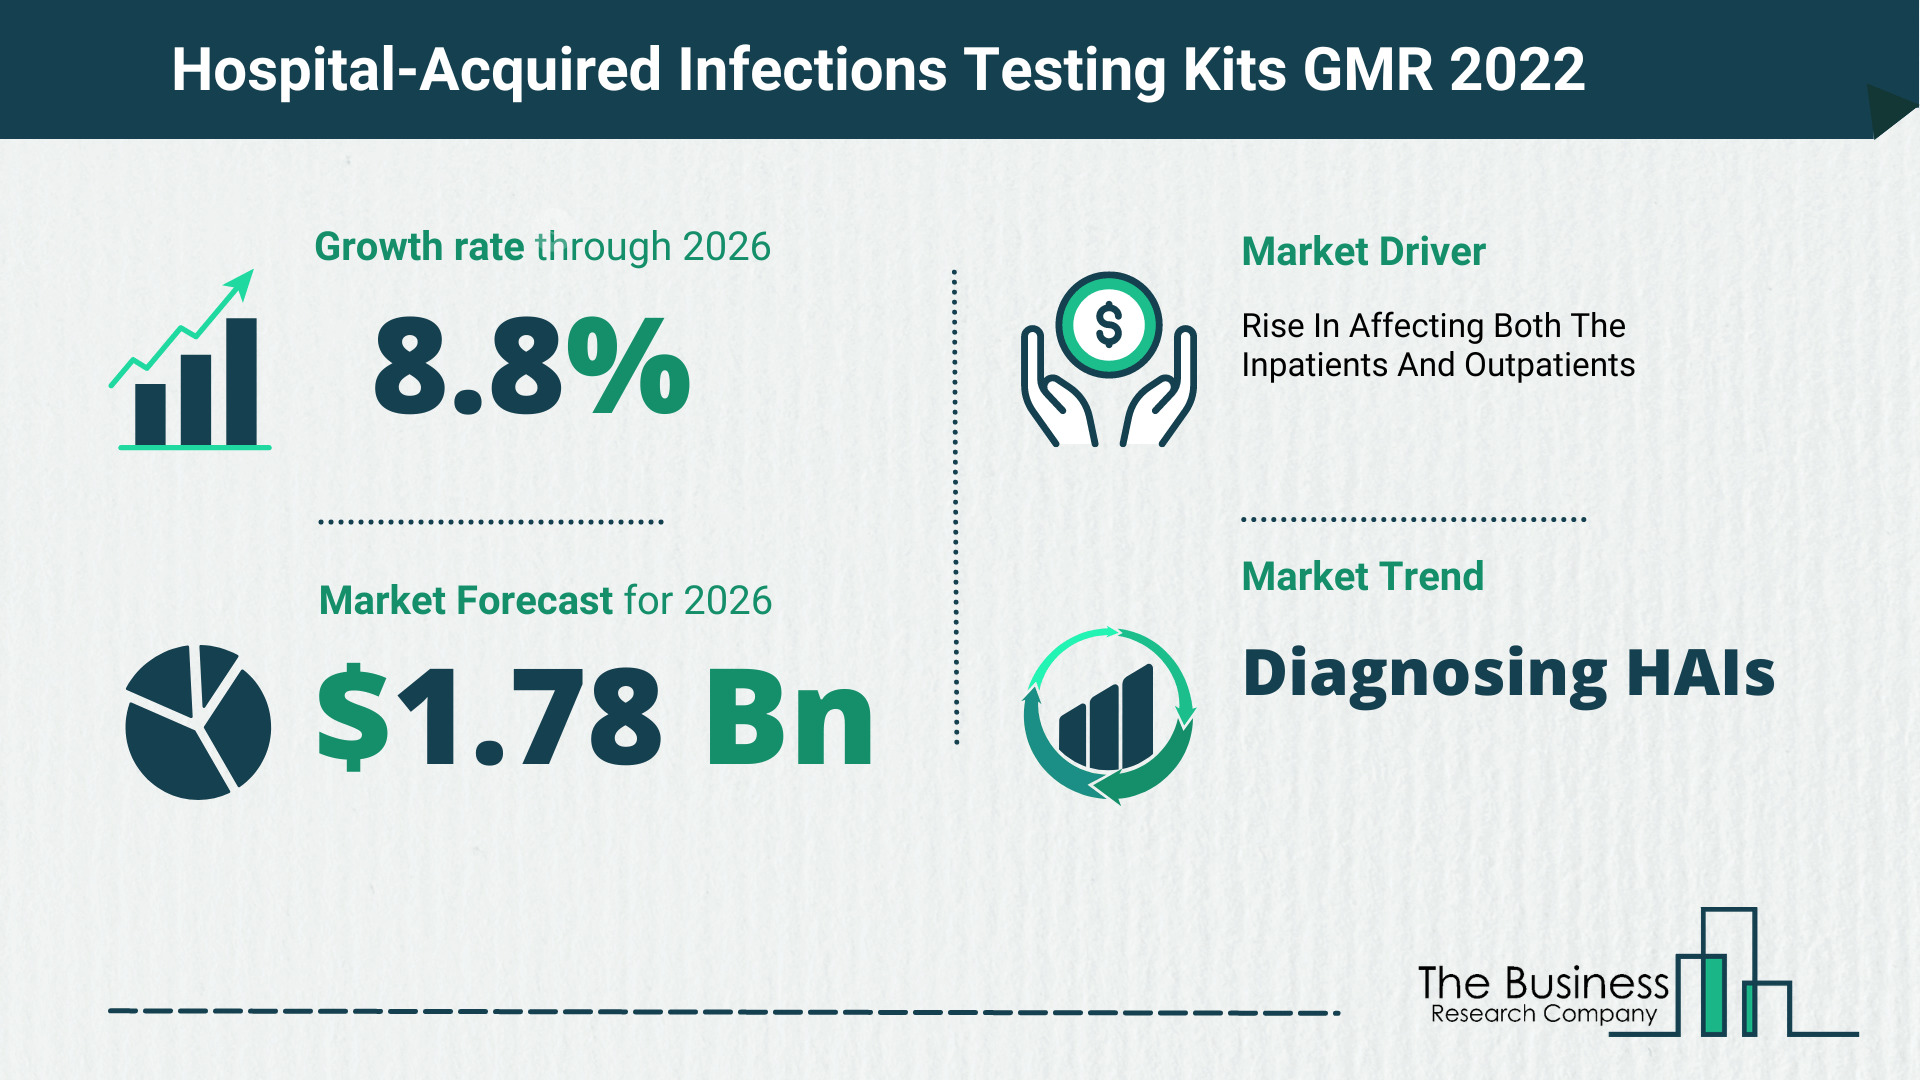 Latest Hospital-Acquired Infections Testing Kits Market Growth Study 2022-2026 By The Business Research Company